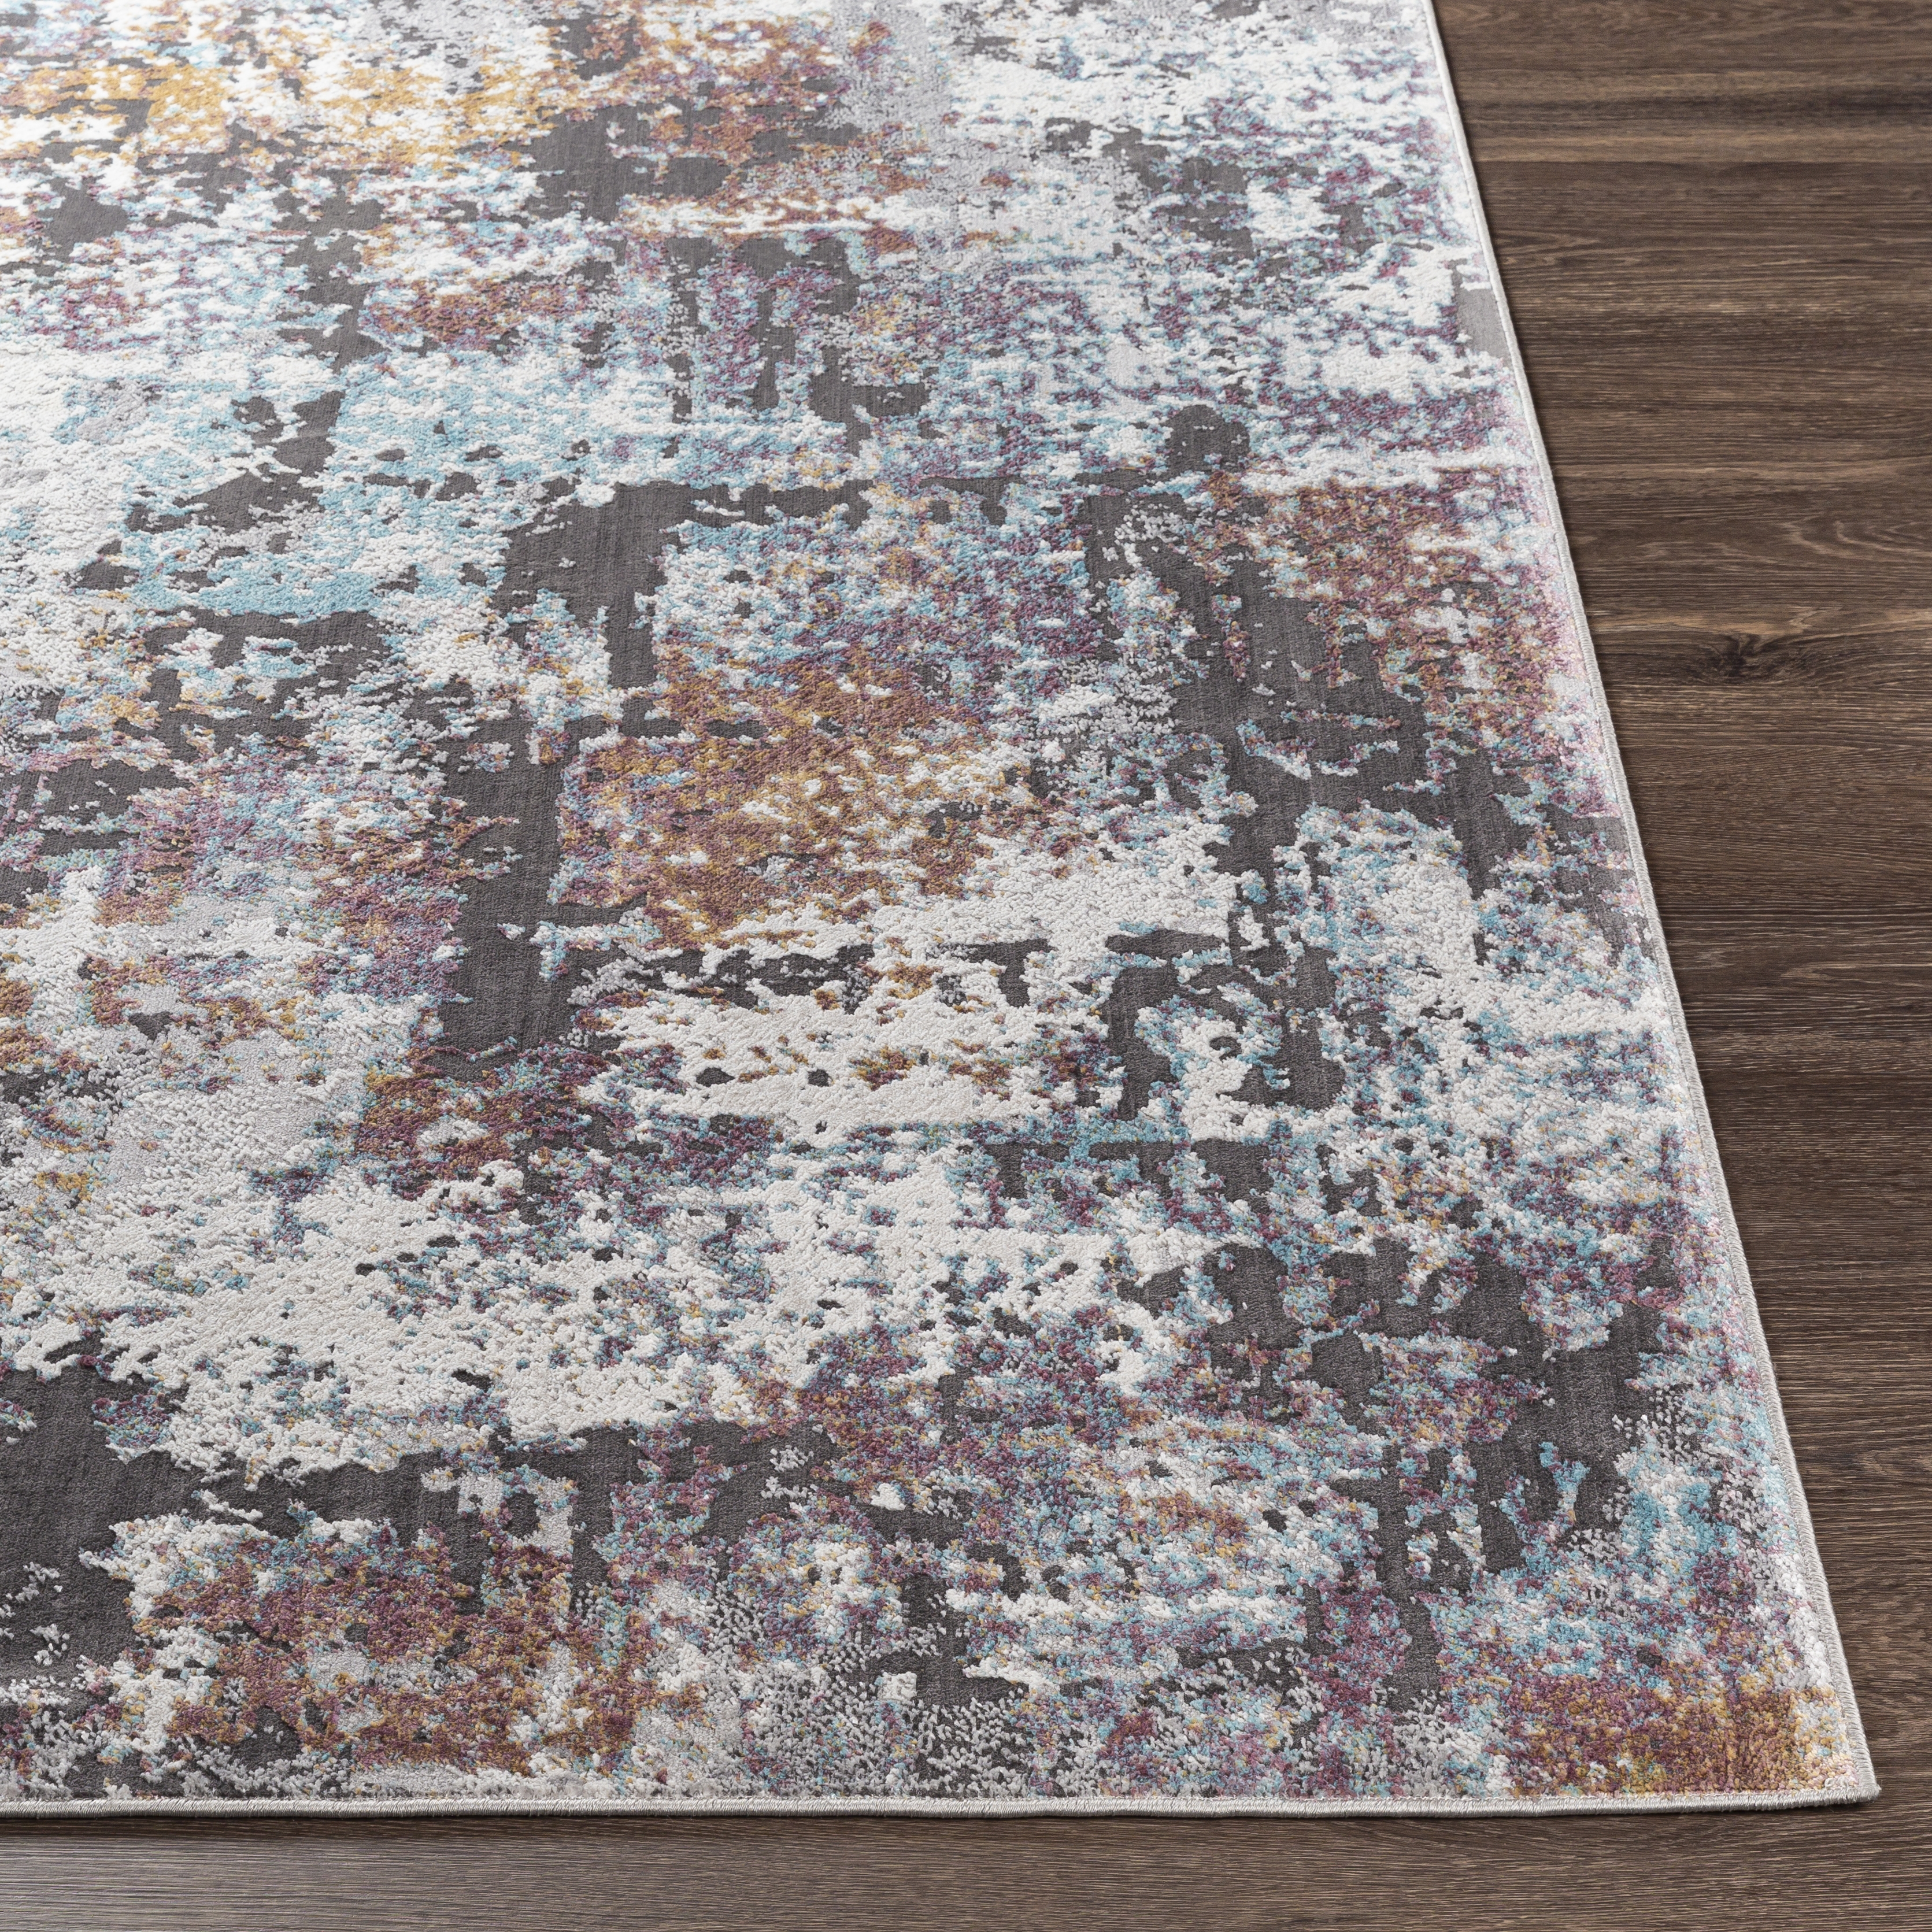 Couture Rug, 7'10" x 10'3" - Image 2